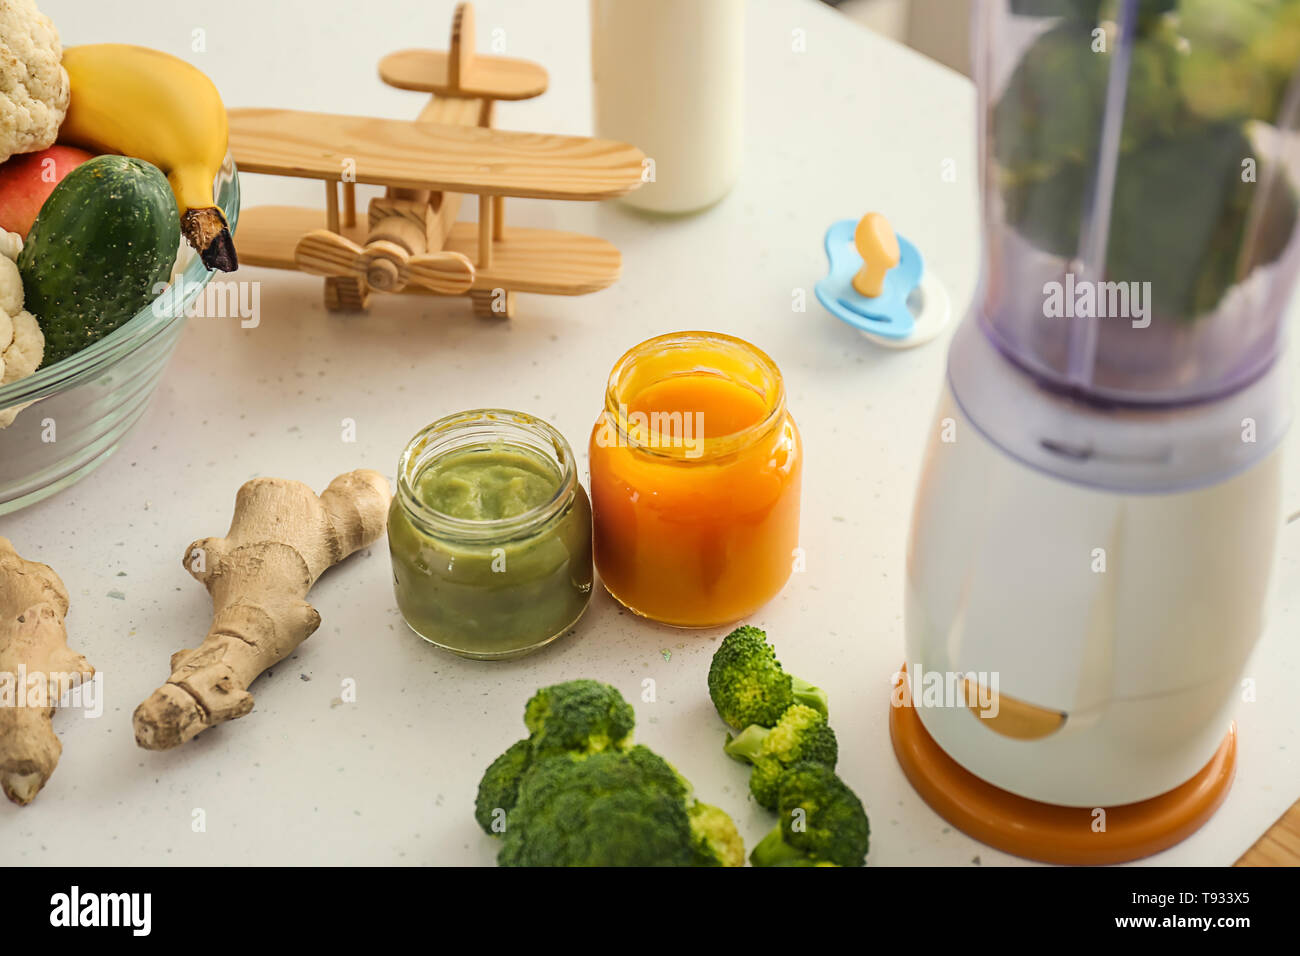 Blender and ingredients for baby food on kitchen table Stock Photo